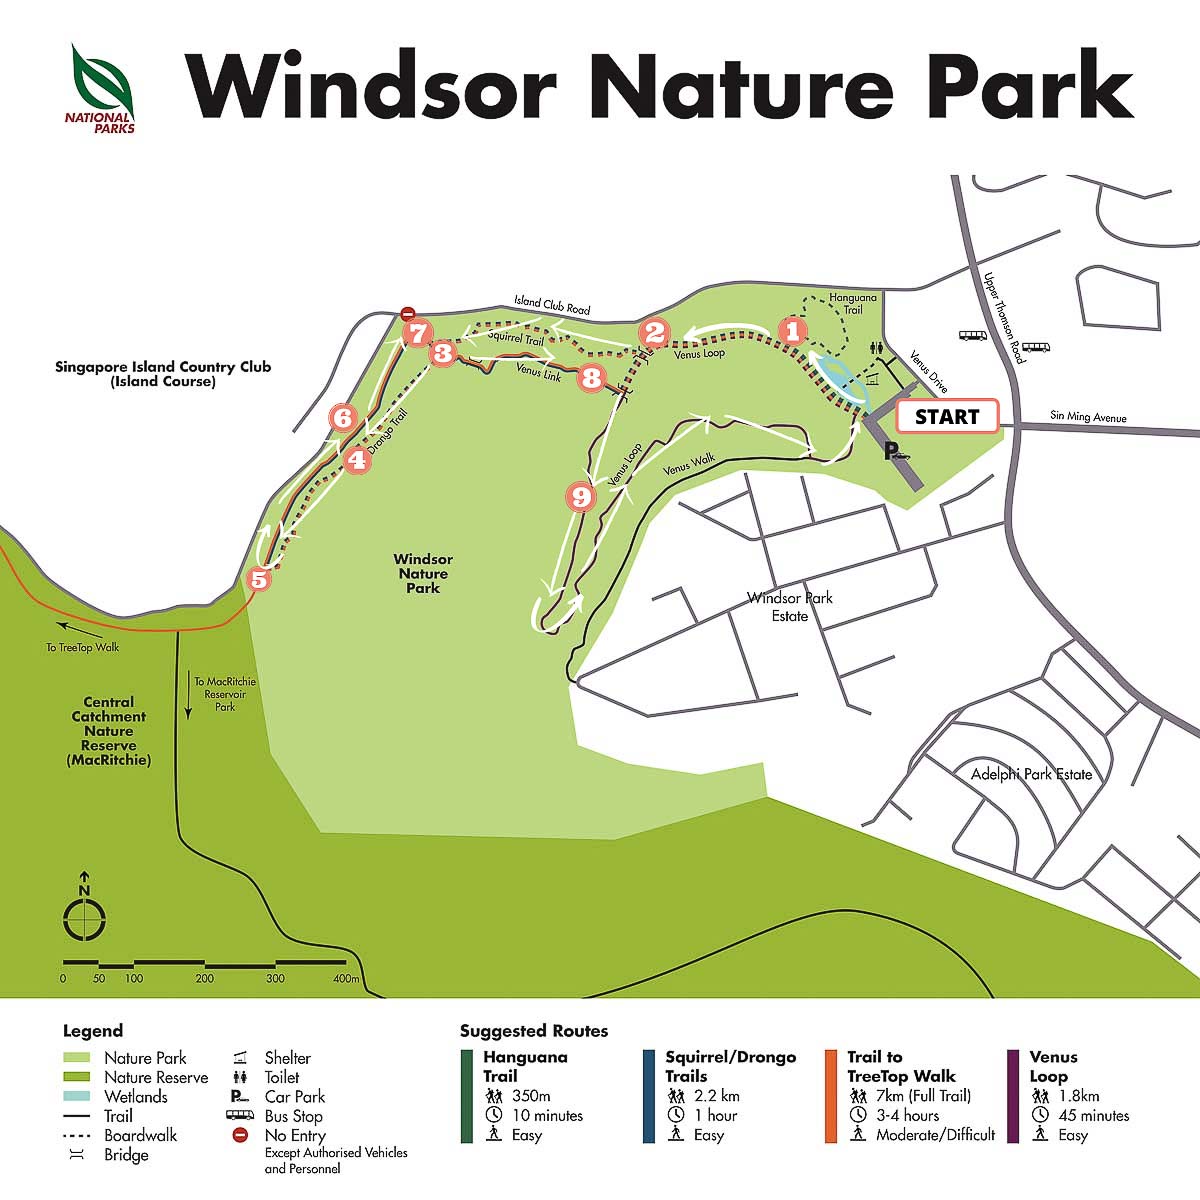 Recommended Hiking Route - Windsor Nature Park